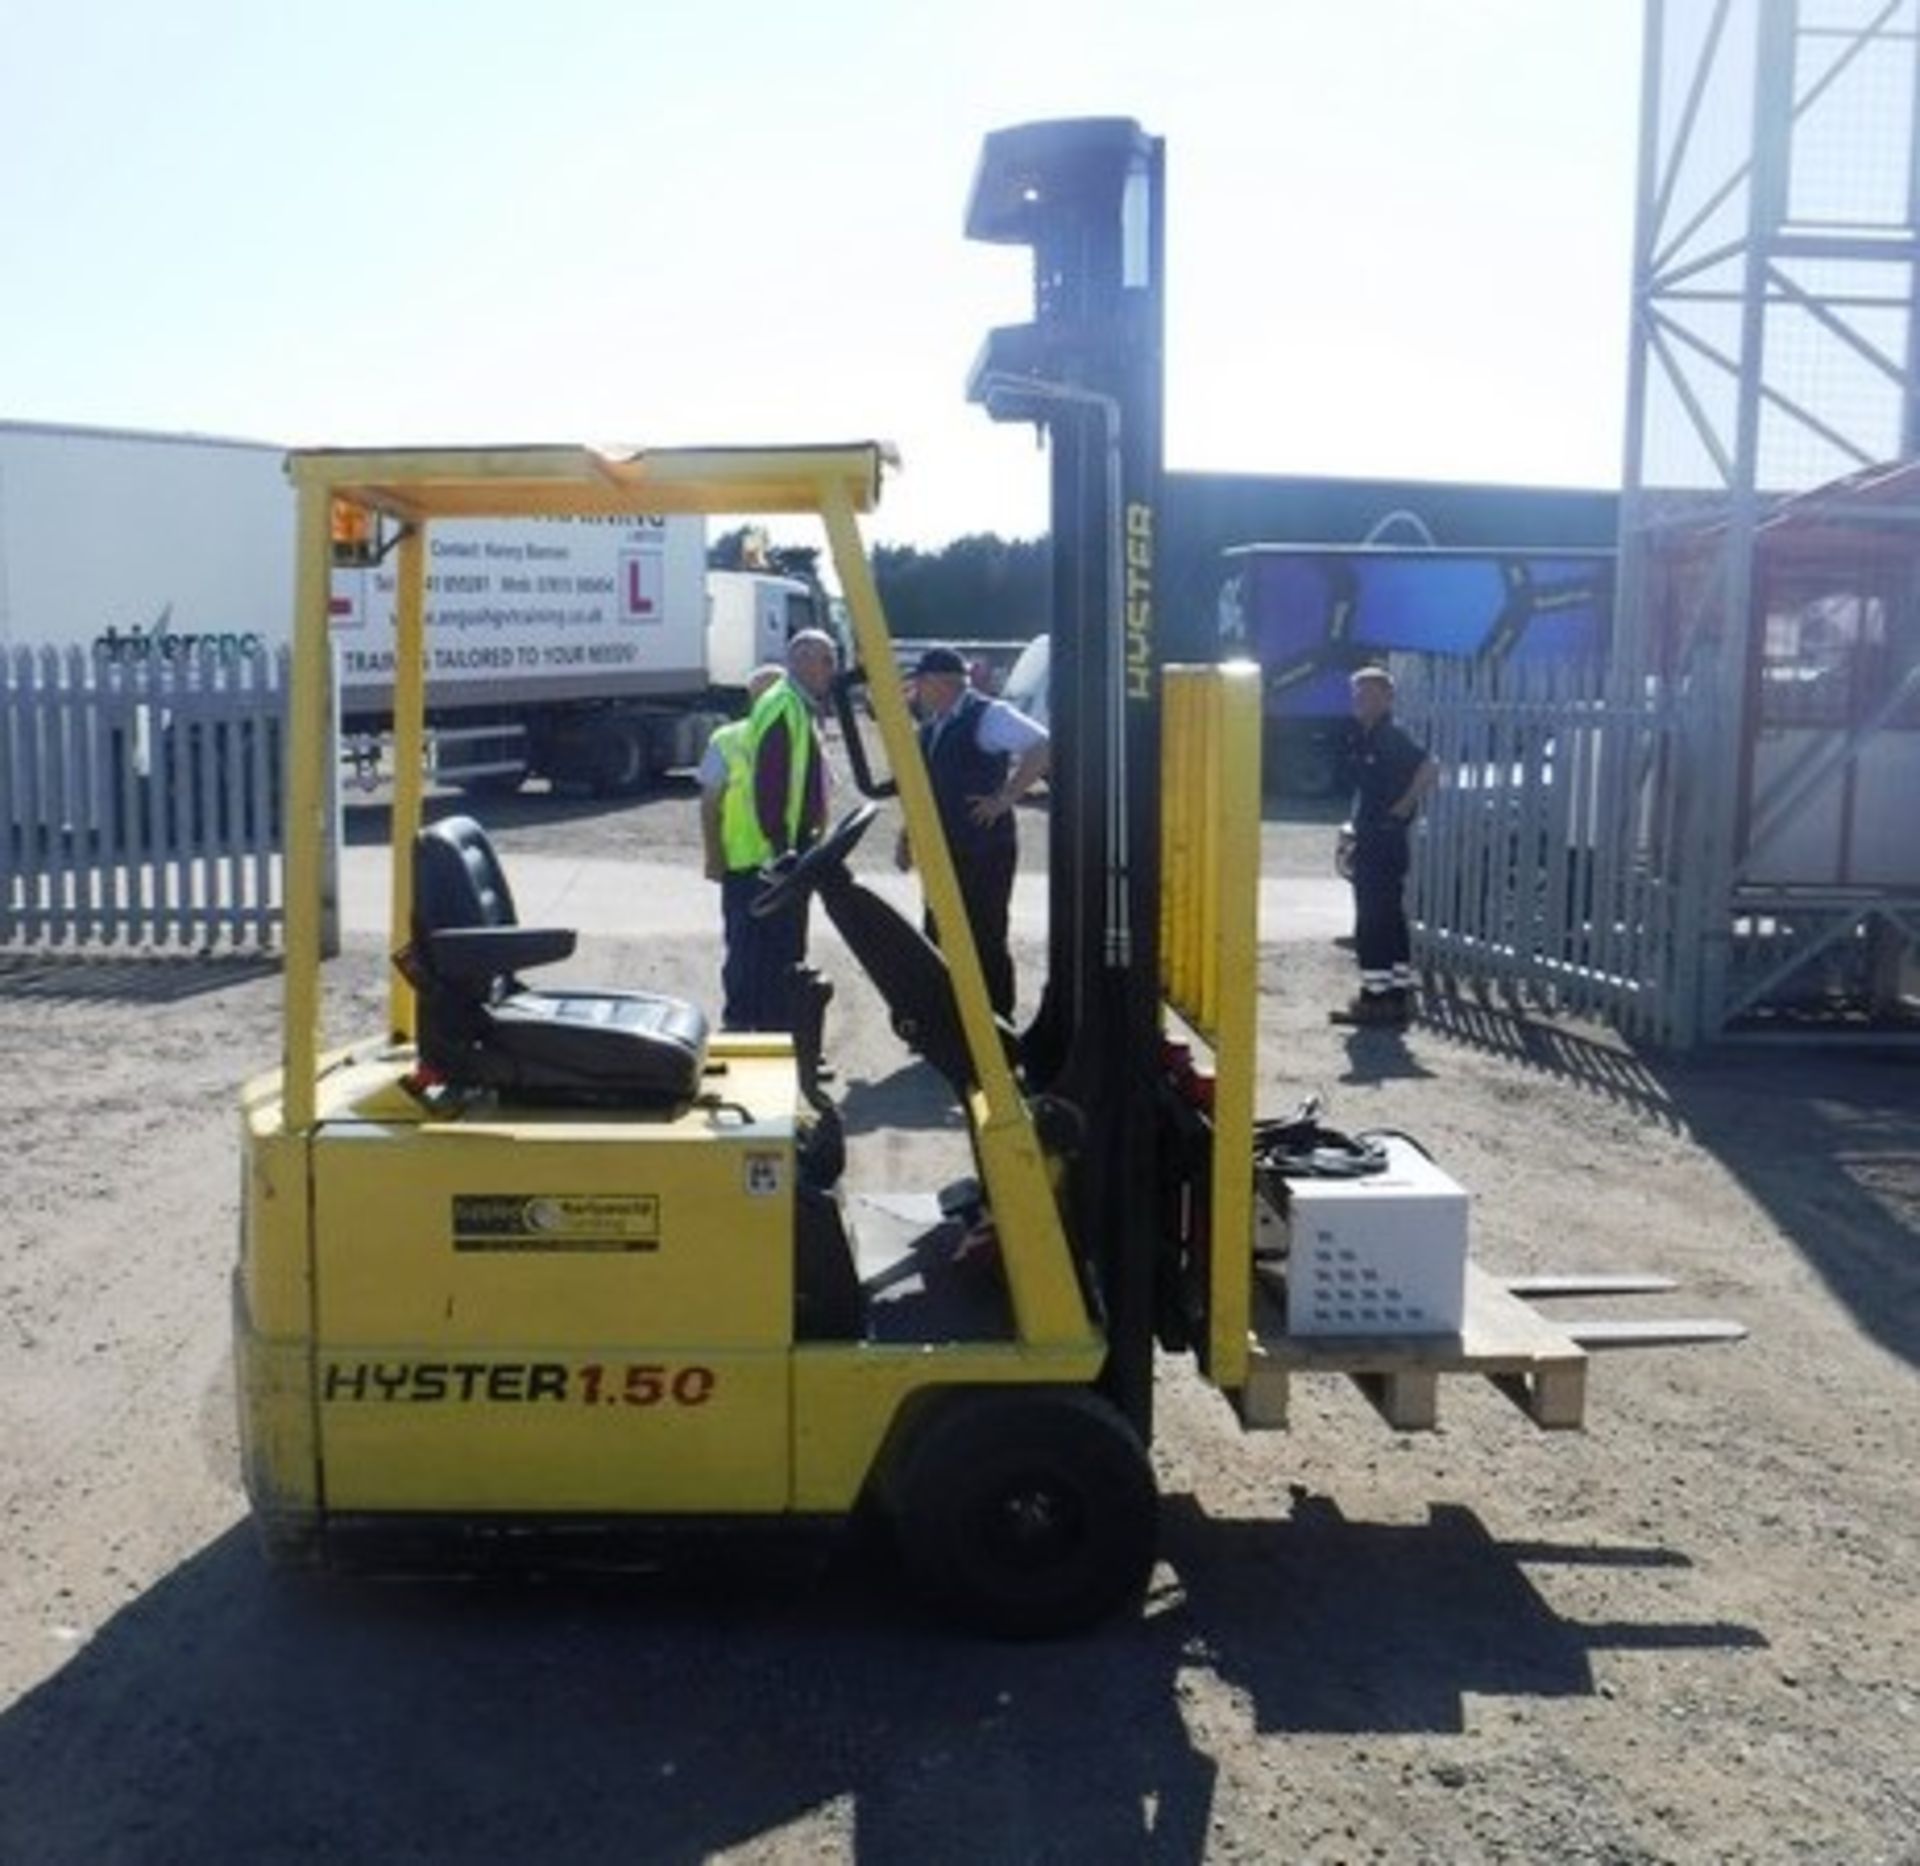 2011 HYSTER forklift A 1.50XL, s/n - C203B01762J, Max Reach - 3800mm, 402hrs (not verified) - Image 10 of 13